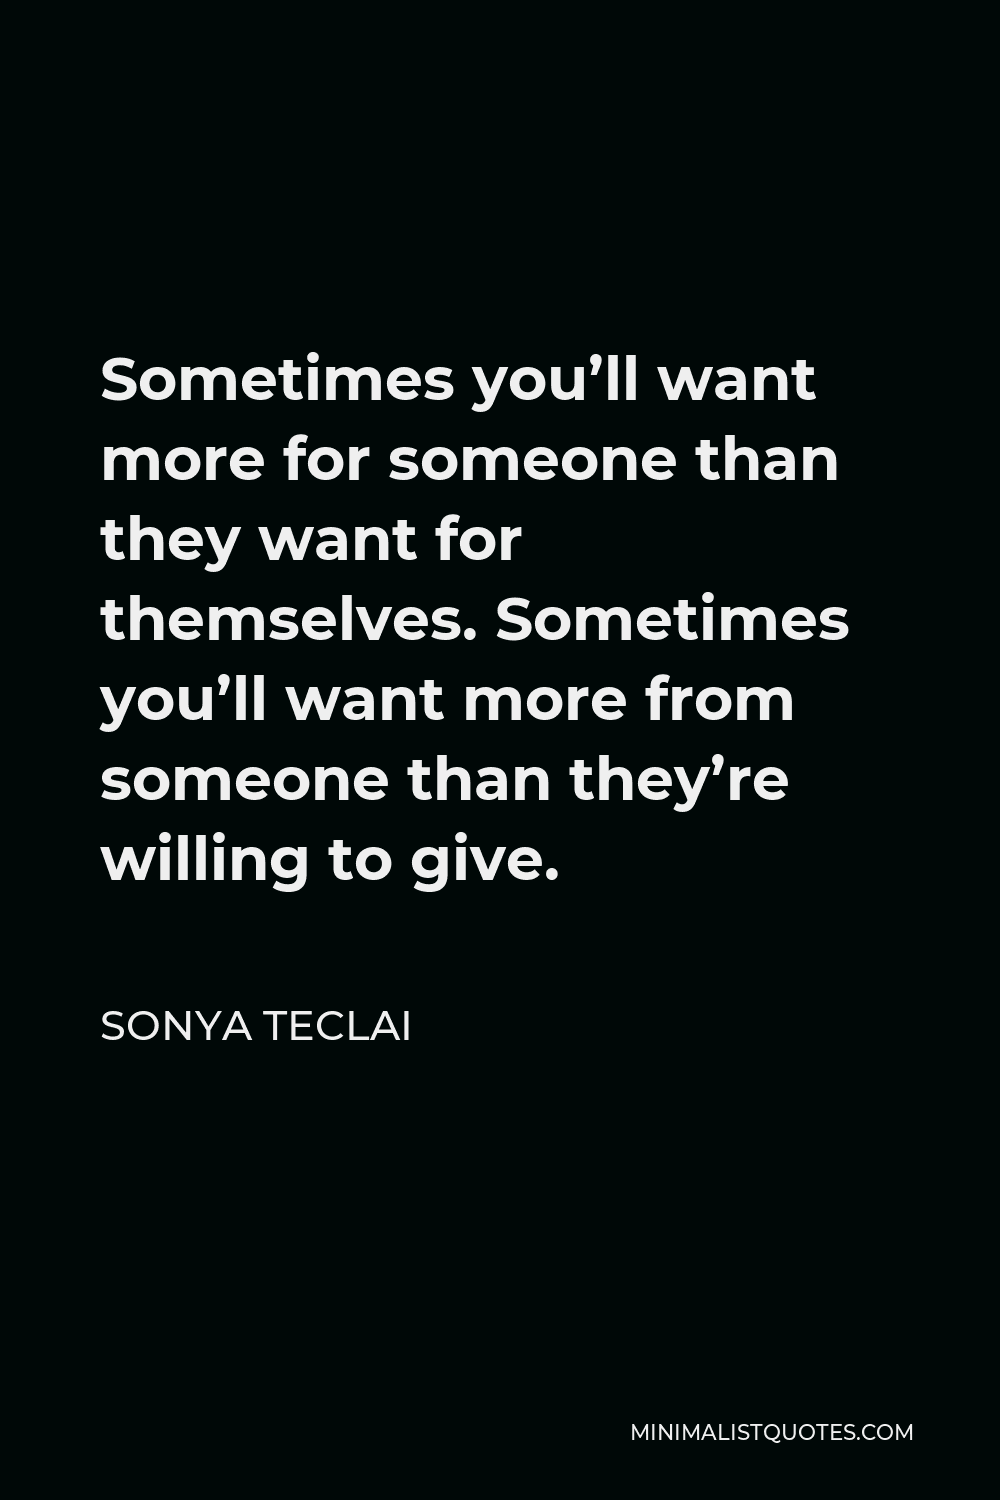 Sonya Teclai Quote - Sometimes you’ll want more for someone than they want for themselves. Sometimes you’ll want more from someone than they’re willing to give.